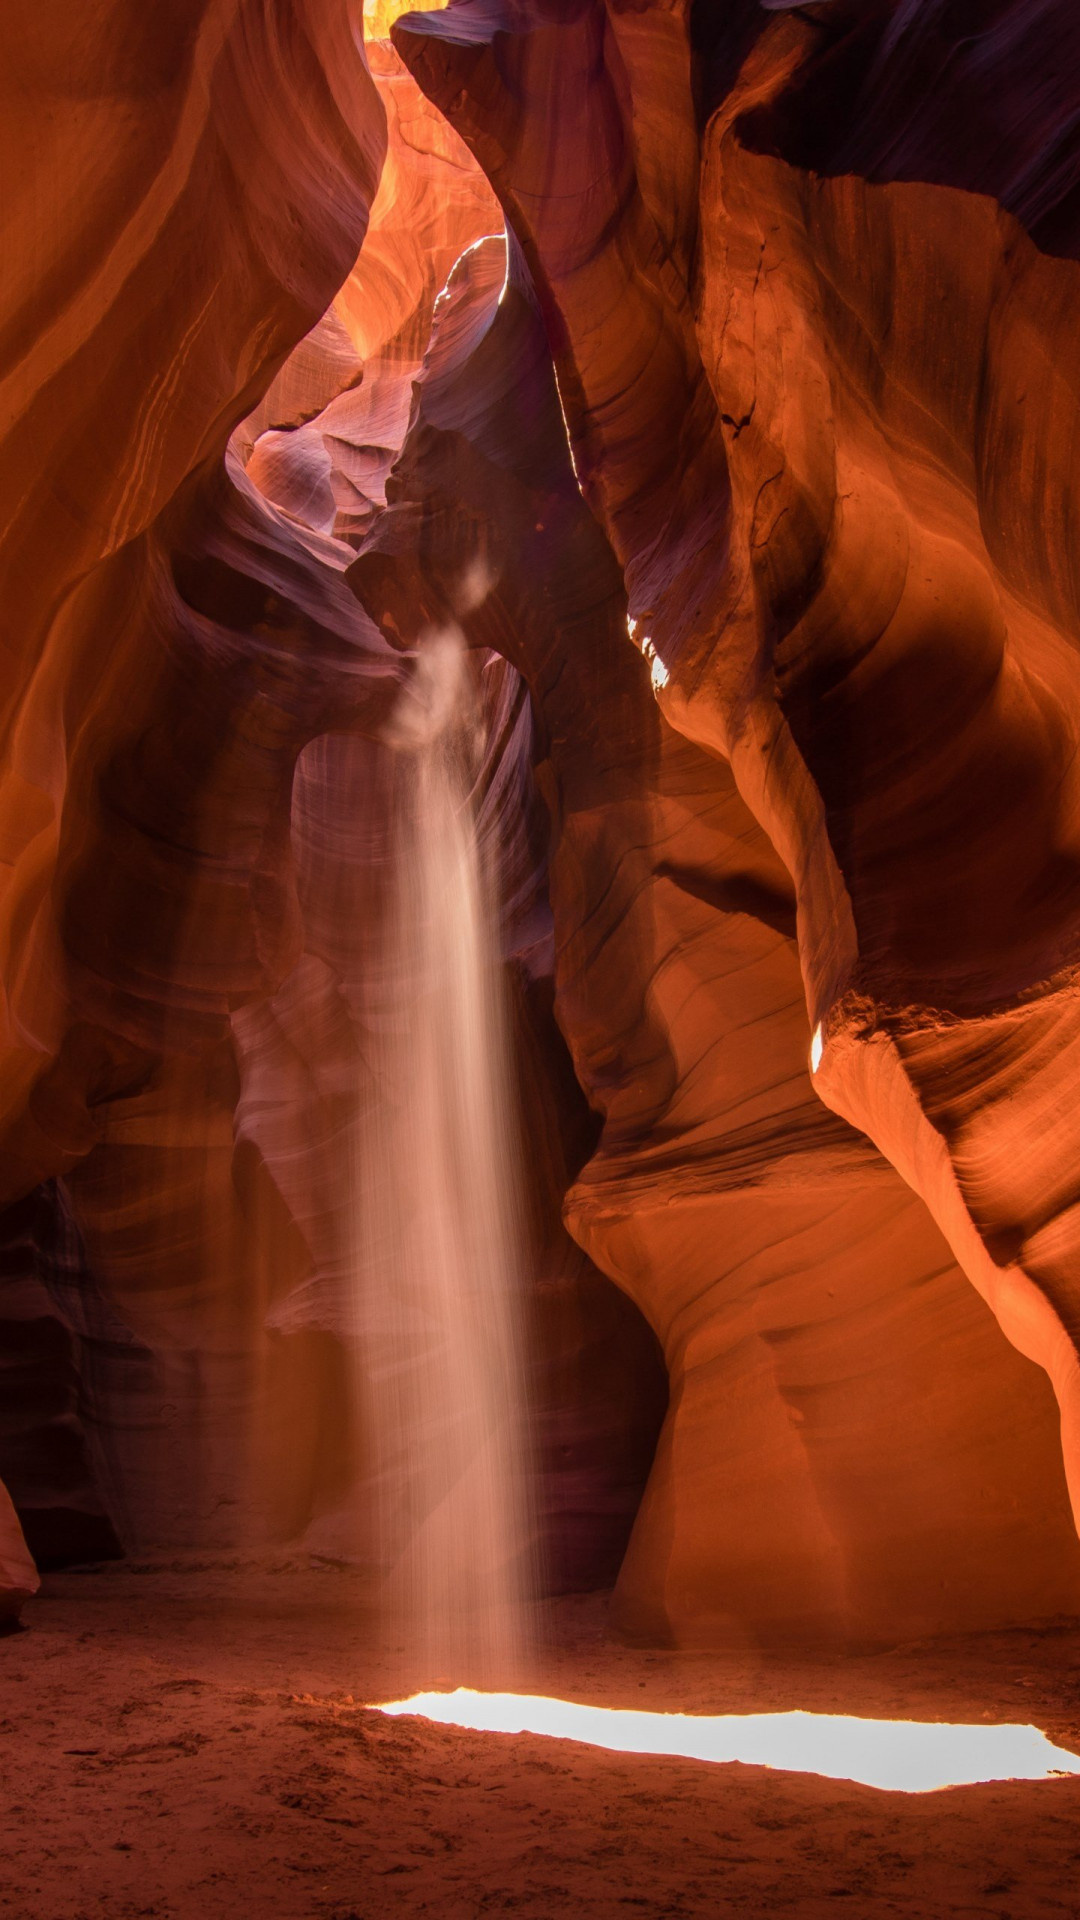 Antelope Canyon, Vibrant colors, Curved rock walls, Wallpaper-worthy, 1080x1920 Full HD Phone